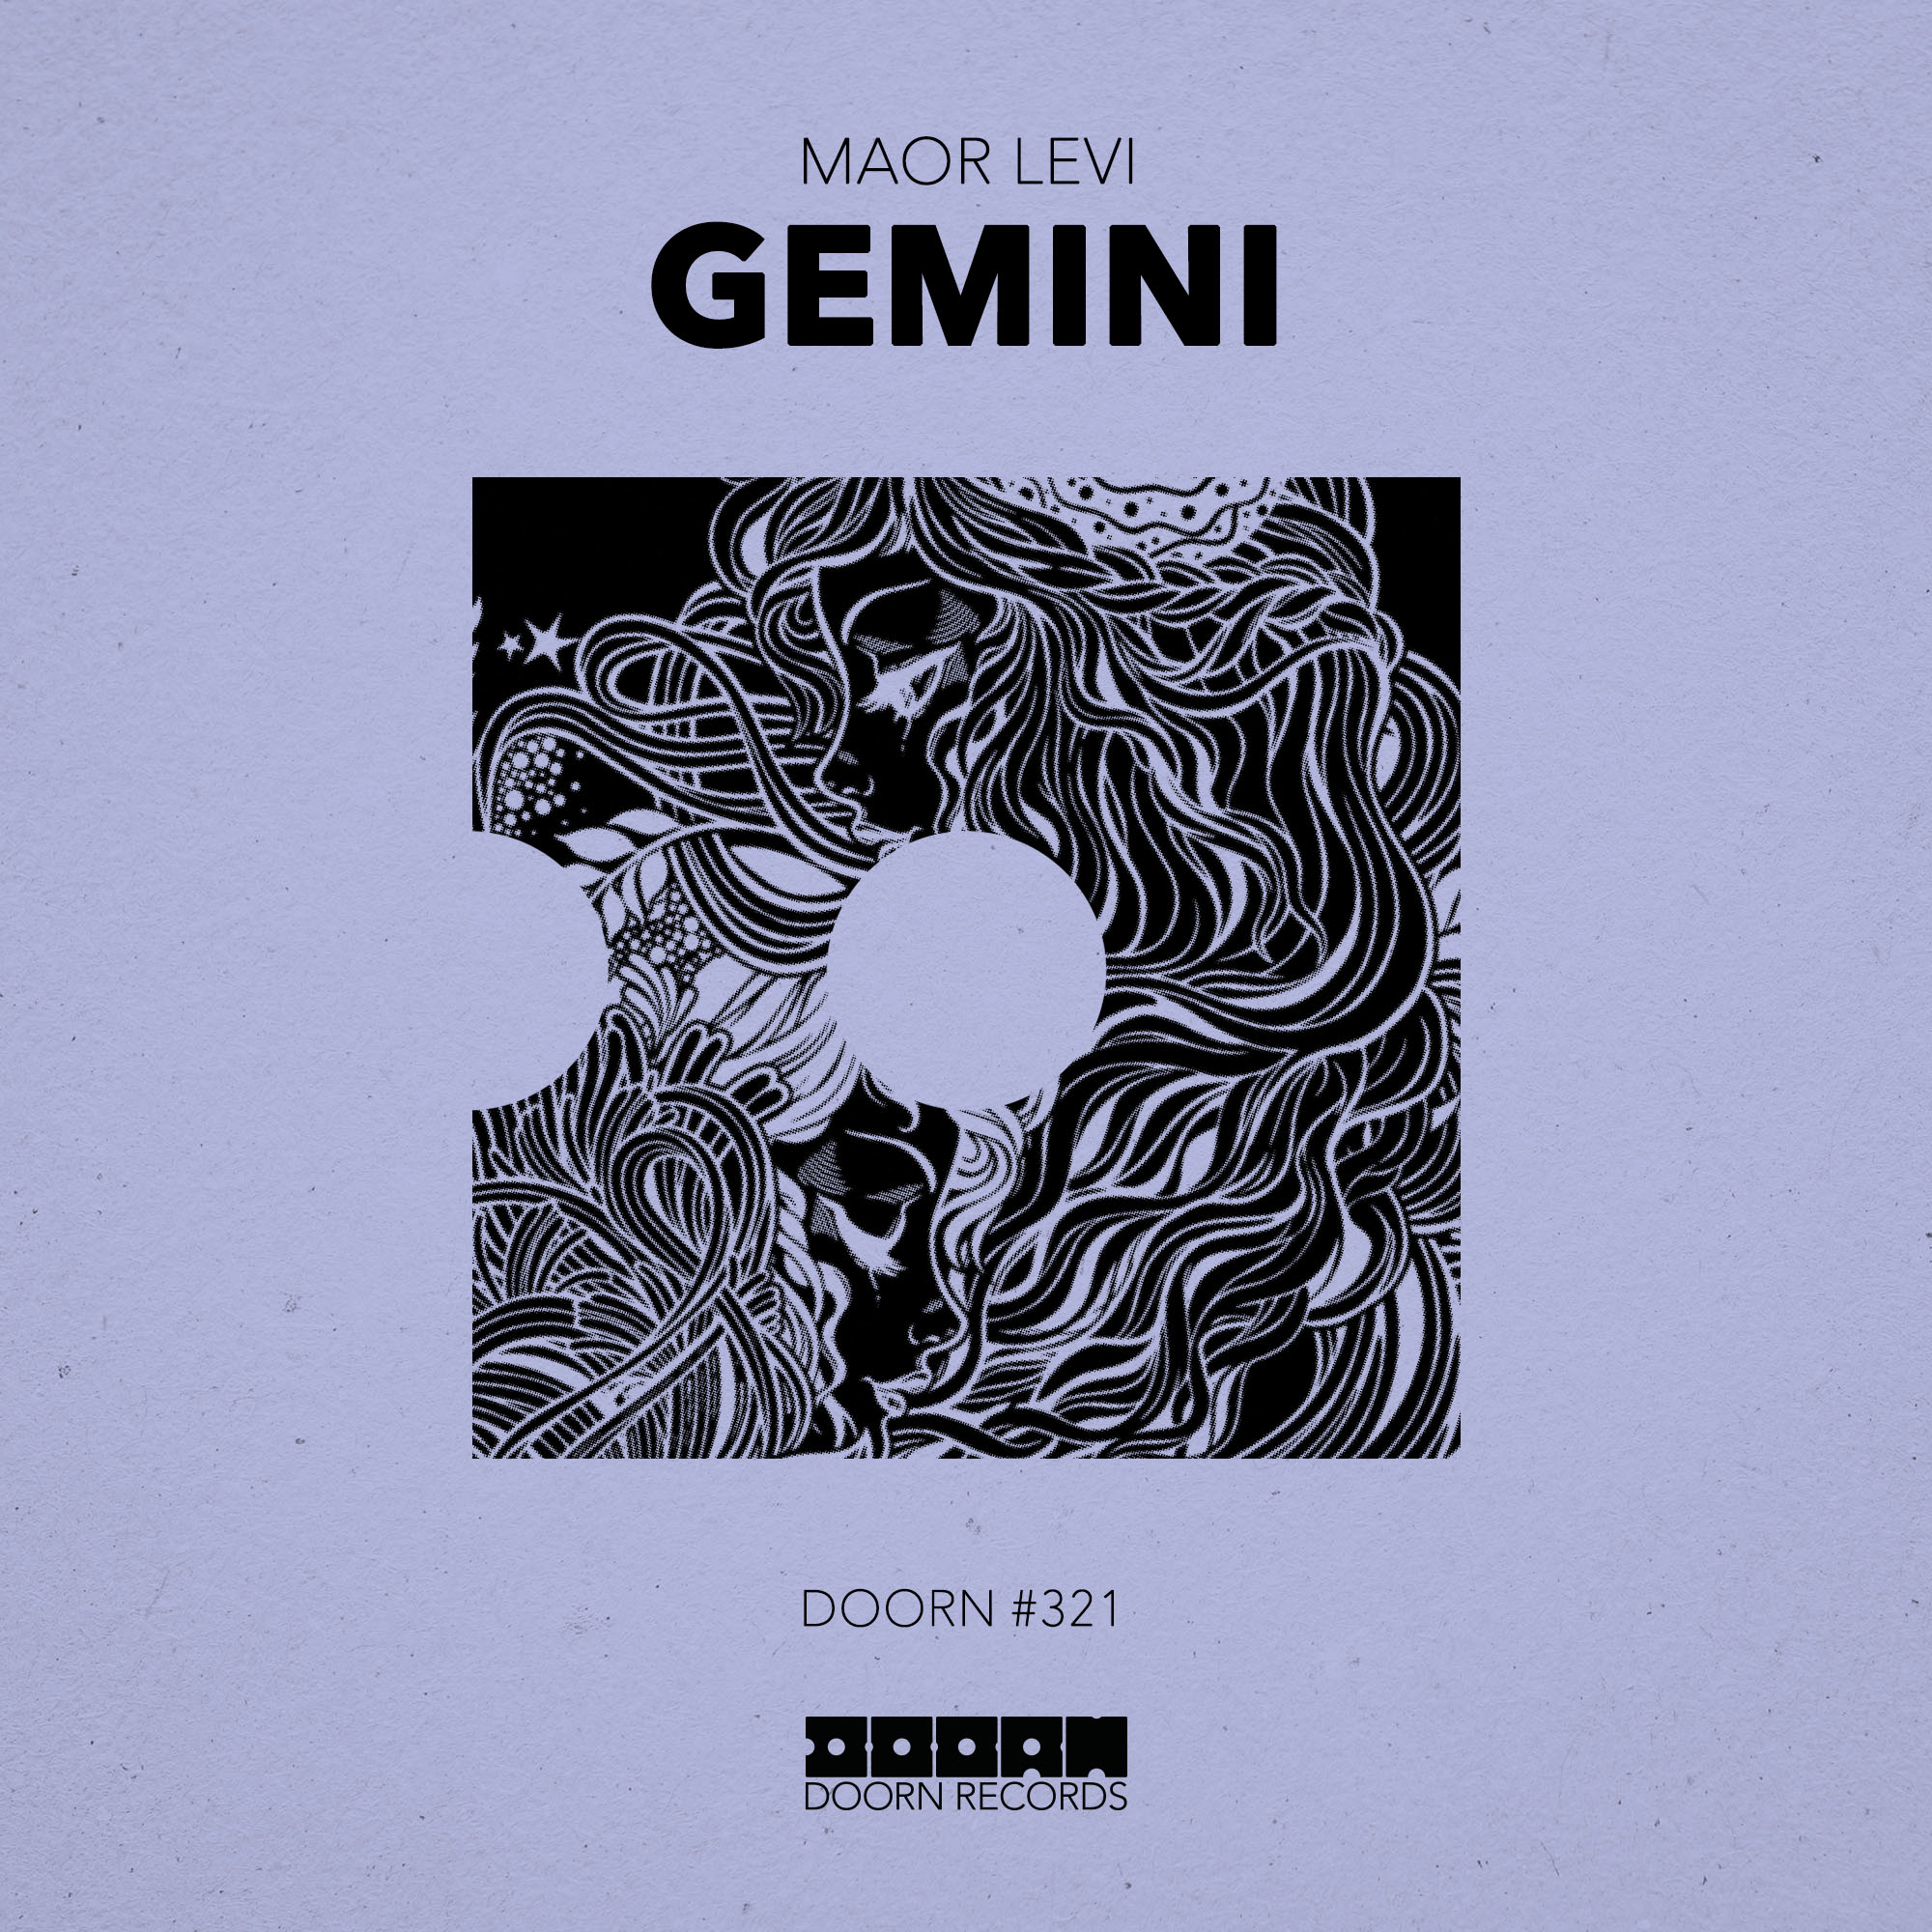 Gemini (Extended Mix)